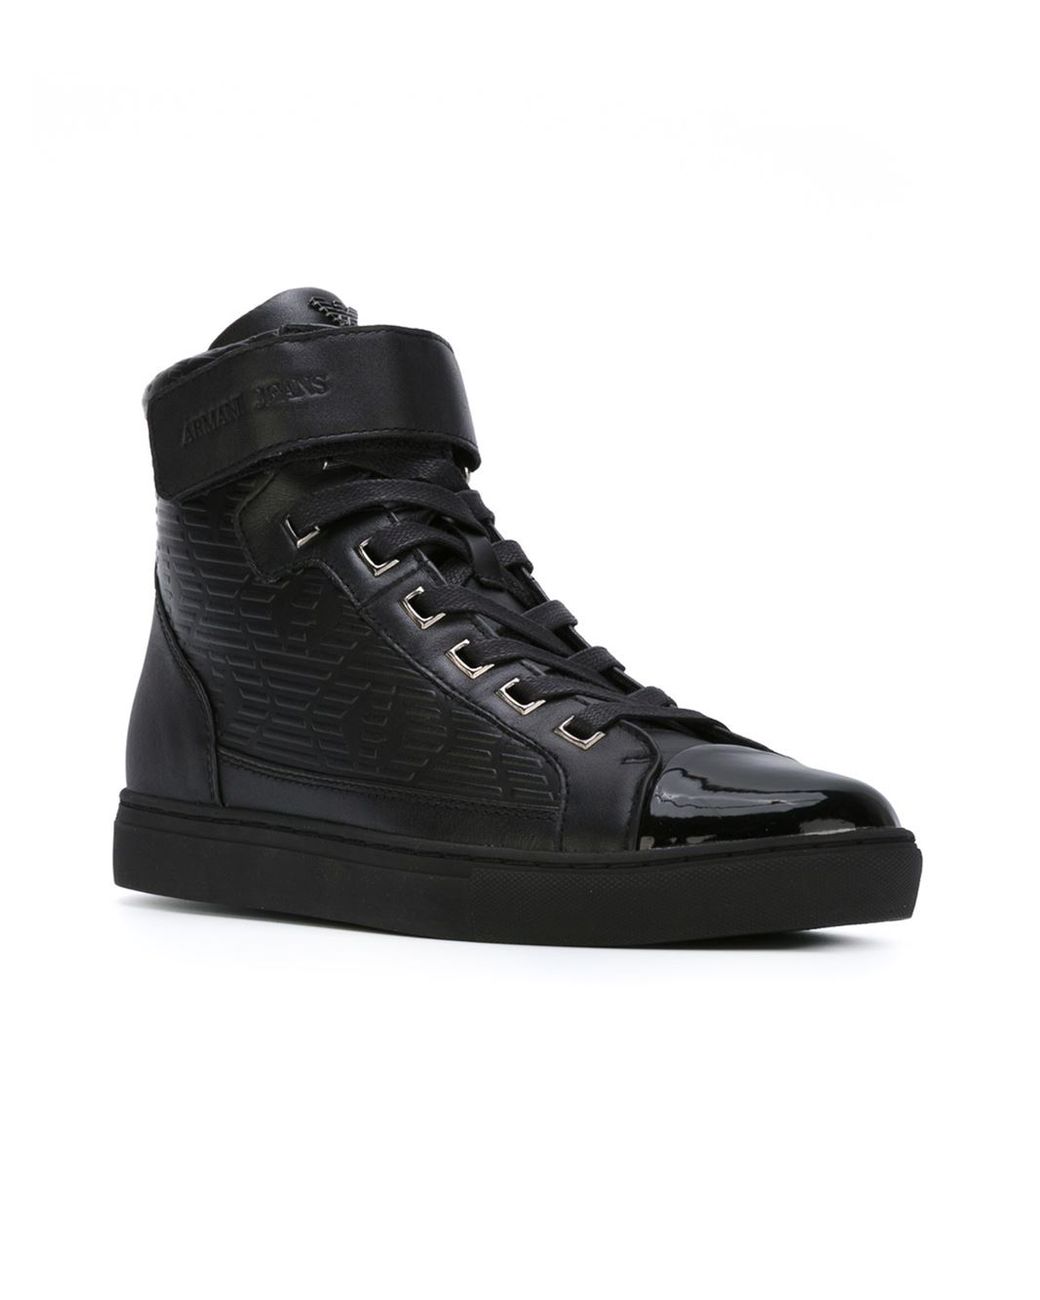 Caius Sprede Oberst Armani Jeans Leather High-Top Sneakers in Black for Men | Lyst